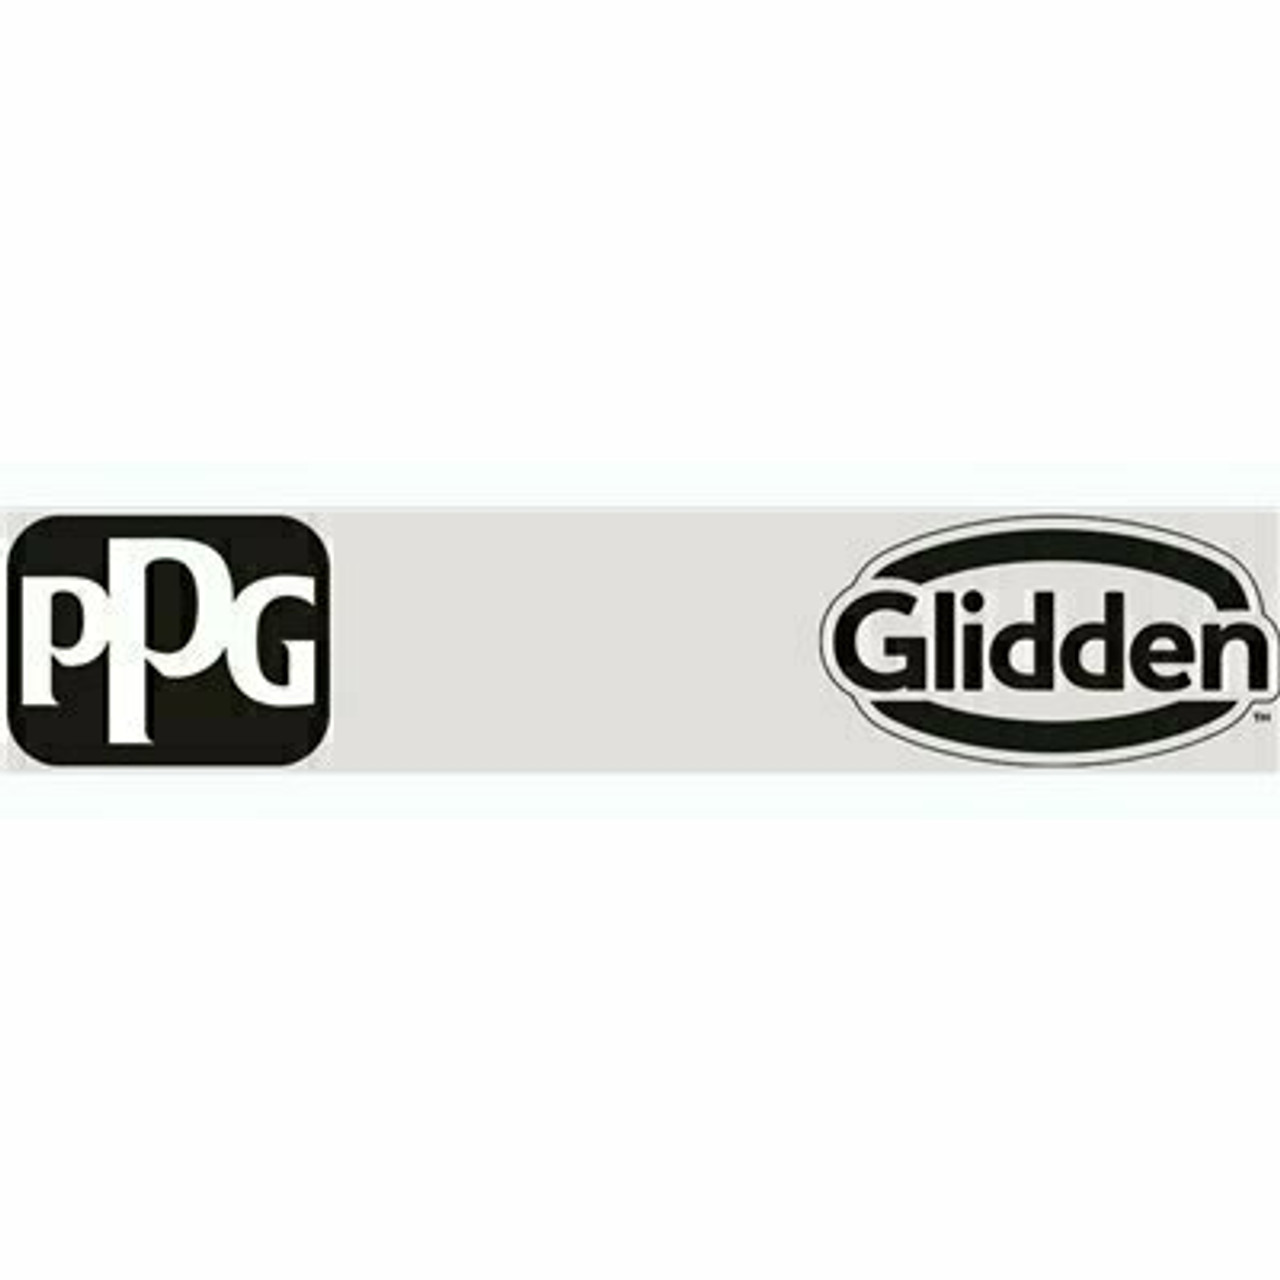 Glidden Diamond 1 Gal. #Ppg1001-3 Thin Ice Semi-Gloss Exterior One-Coat Paint With Primer